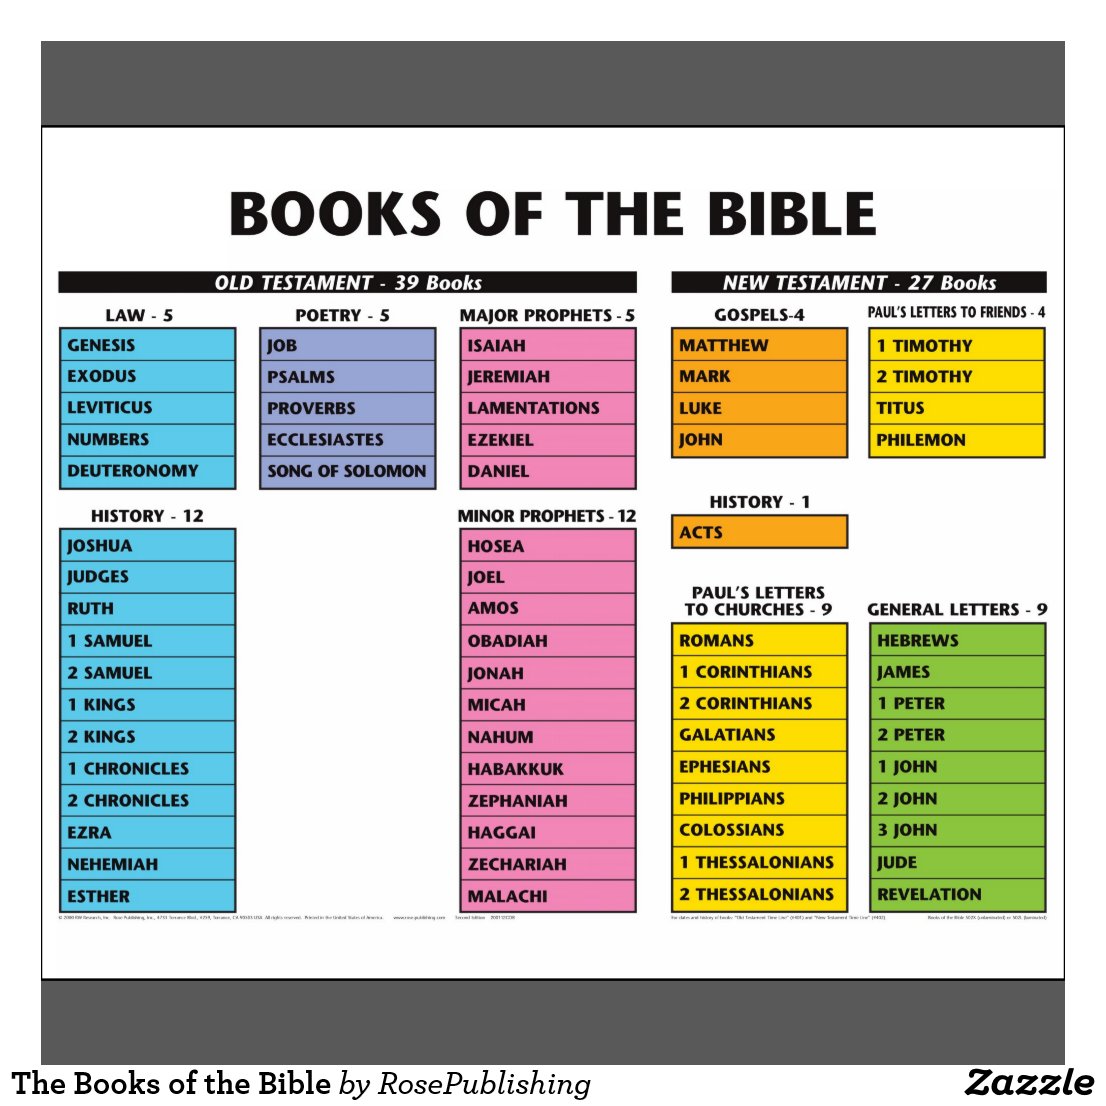 66 books of the bible in order